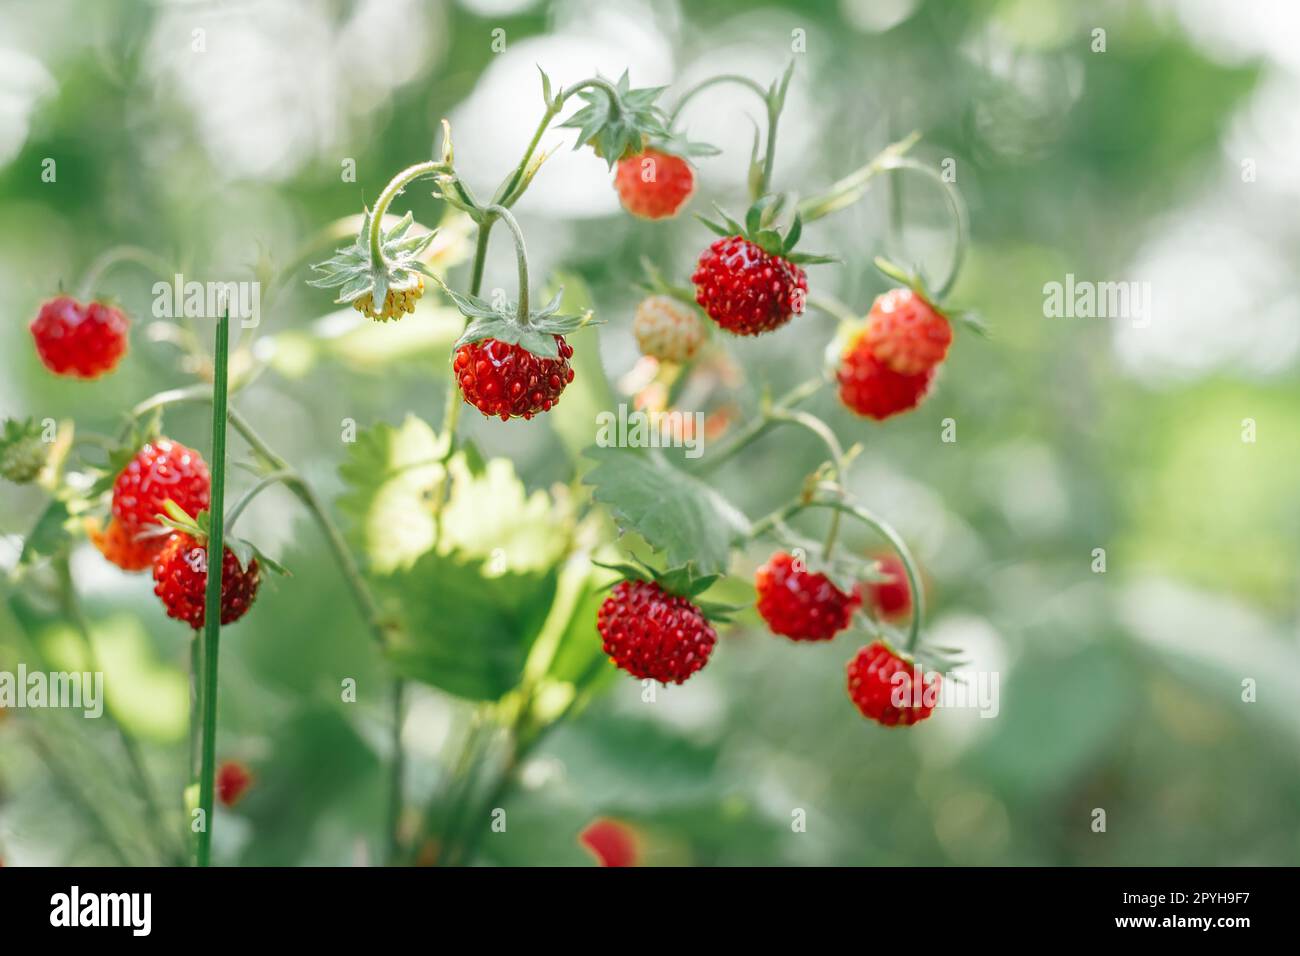 Wild strawberry bush with tasty ripe red berries and green leaves grow in green grass in wild meadow. Copy space. Macro. Stock Photo